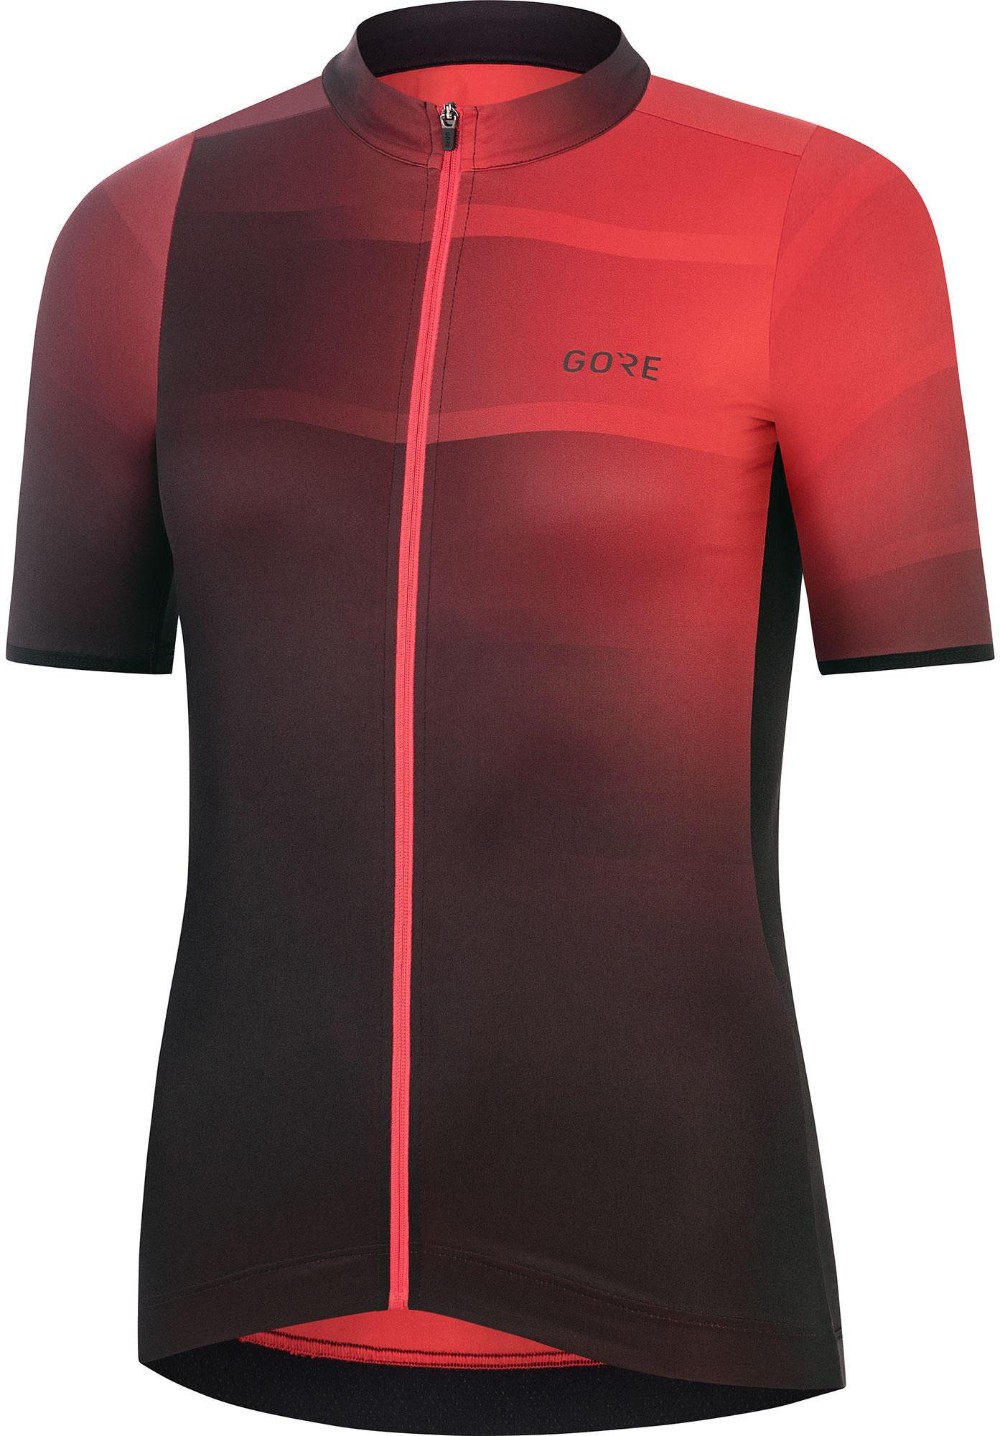 Ardent Womens Short Sleeve Jersey image 0